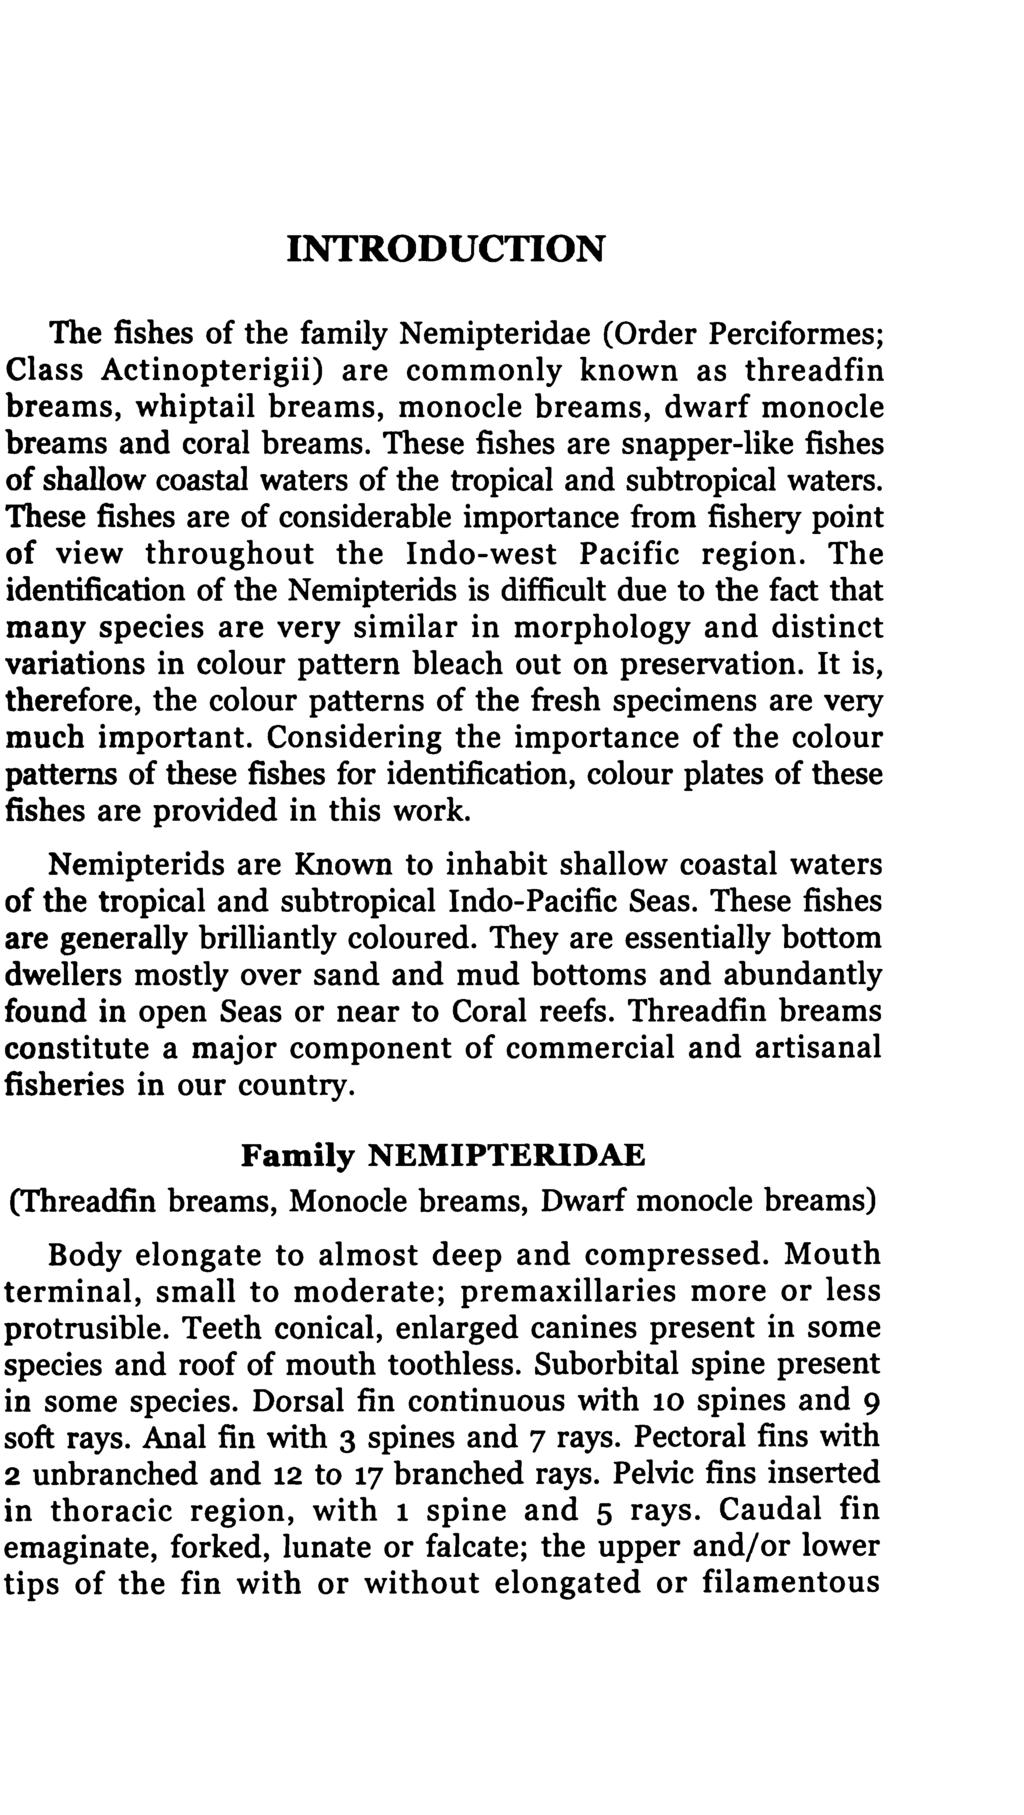 INTRODUCTION The fishes of the family Nemipteridae (Order Perciformes; Class Actinopterigii) are commonly known as threadfin breams, whiptail breams, monocle breams, dwarf monocle breams and coral